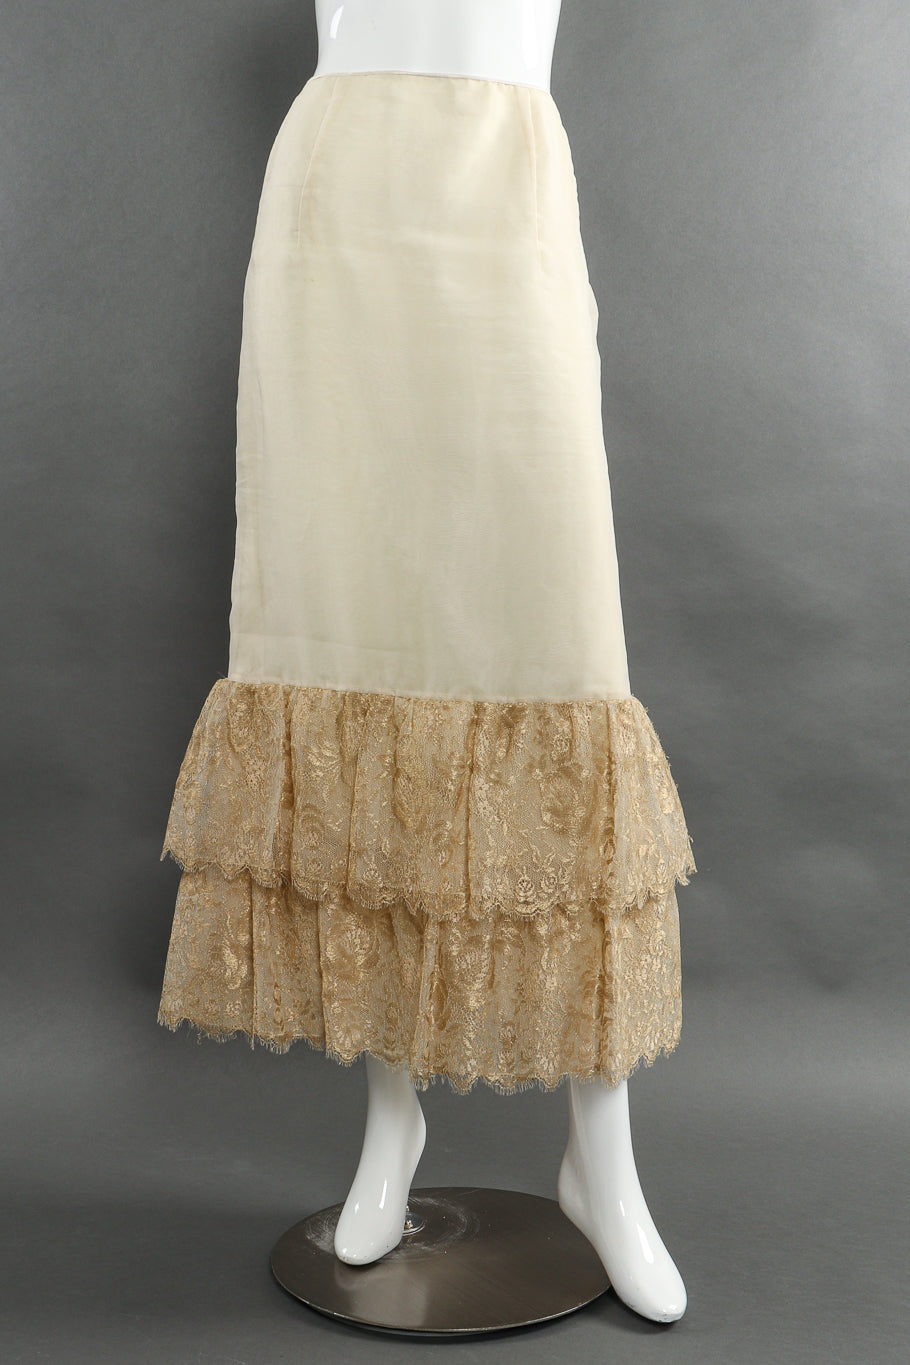 Vintage Mary McFadden Tiered Lace Mermaid Skirt front view on mannequin @Recessla